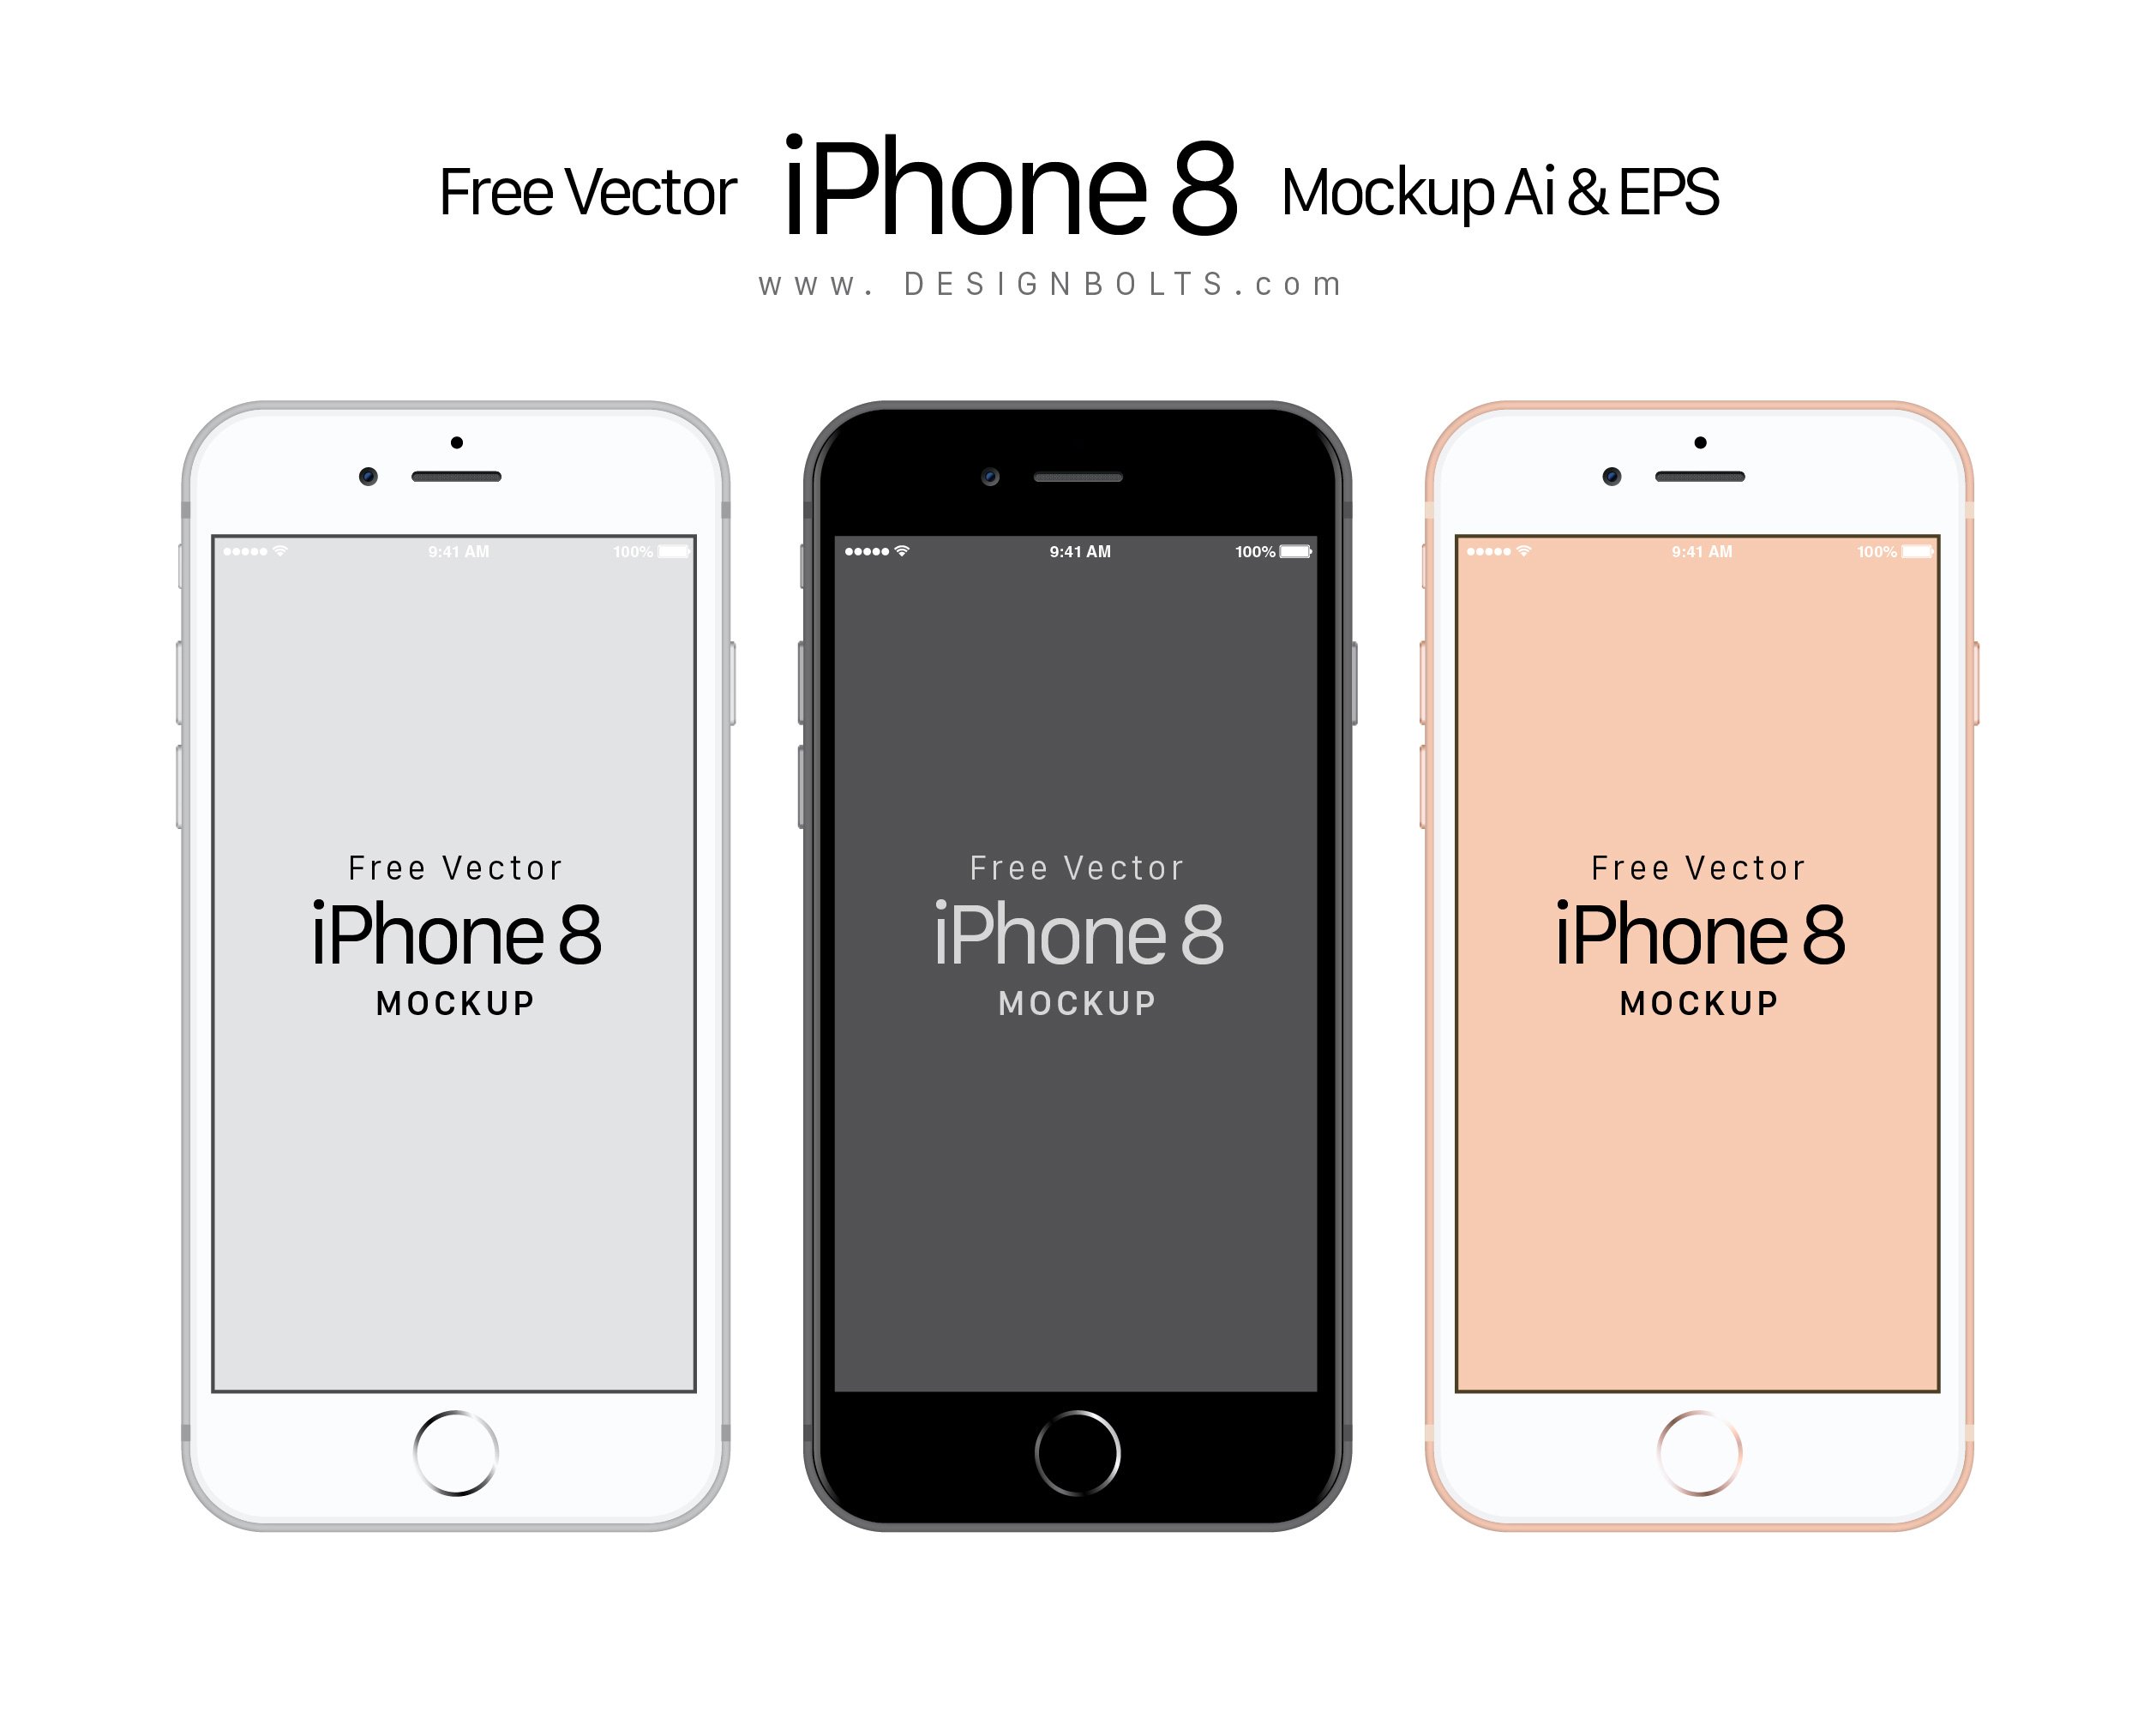 Download Free Vector Apple iPhone 8 Mockup Ai & EPS